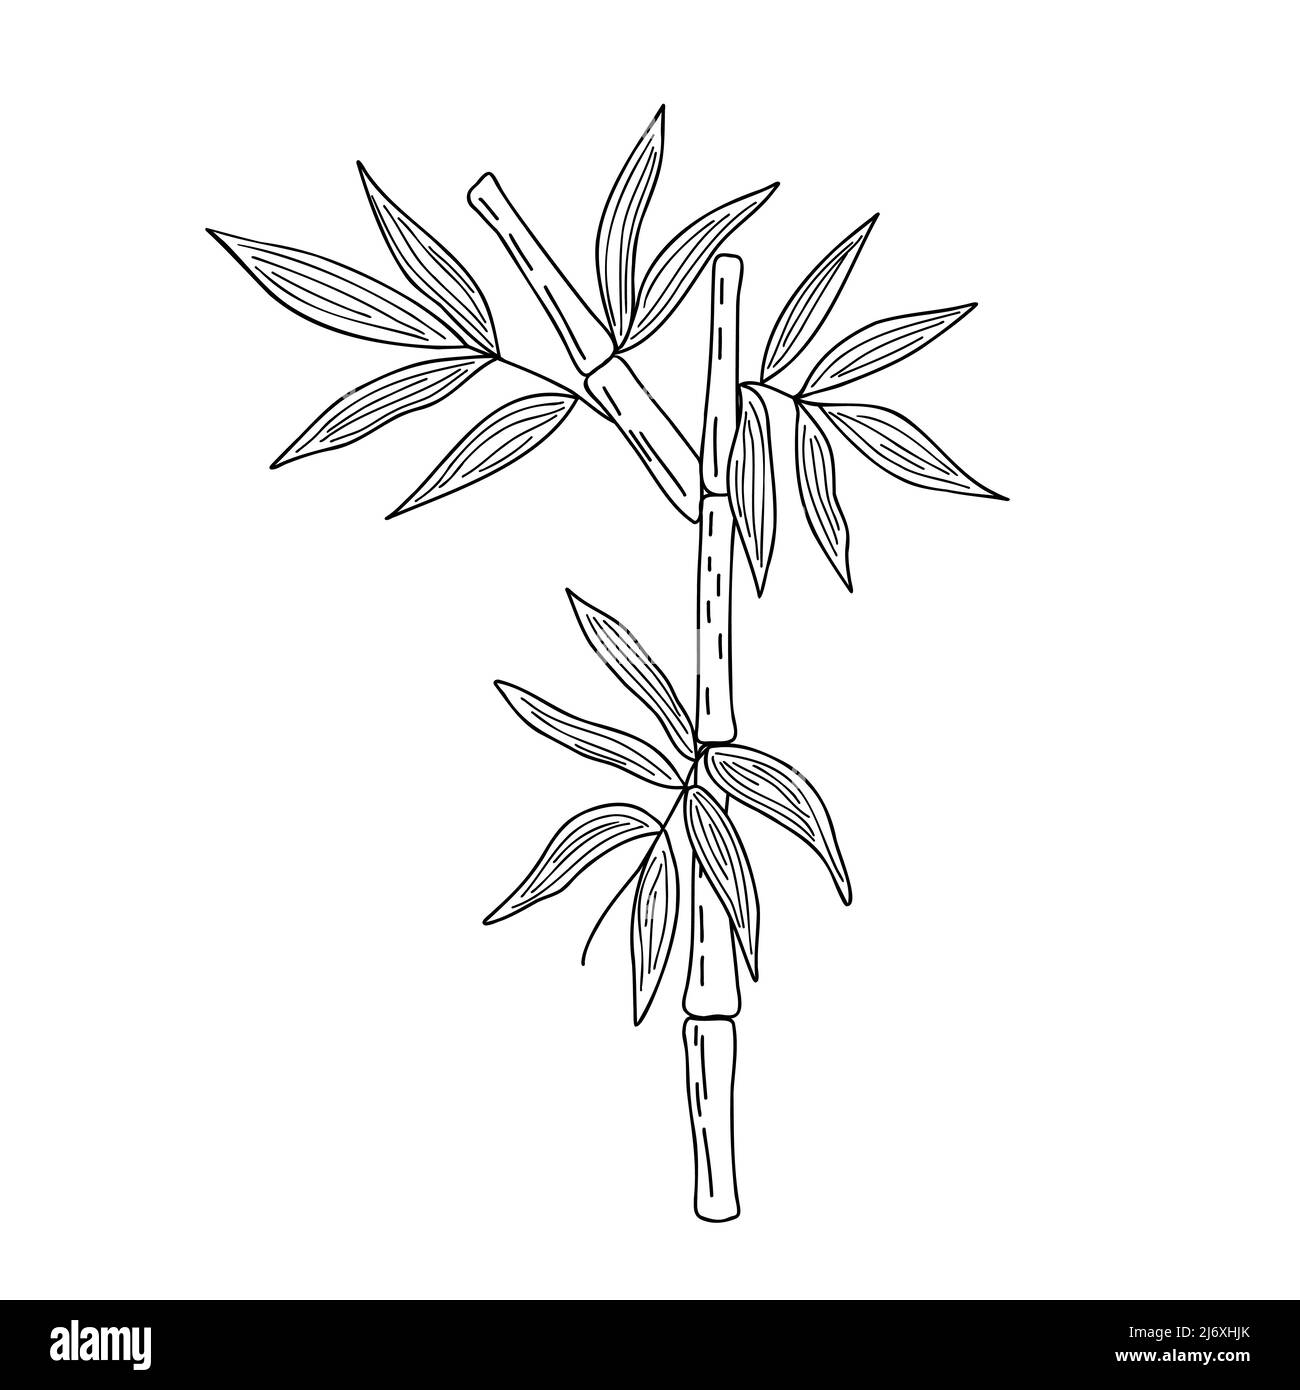 Bamboo leaves simple linear style vector illustration, traditional japanese plant, oriental decorative ornament for design, greeting card, template, banner, zen concept Stock Vector